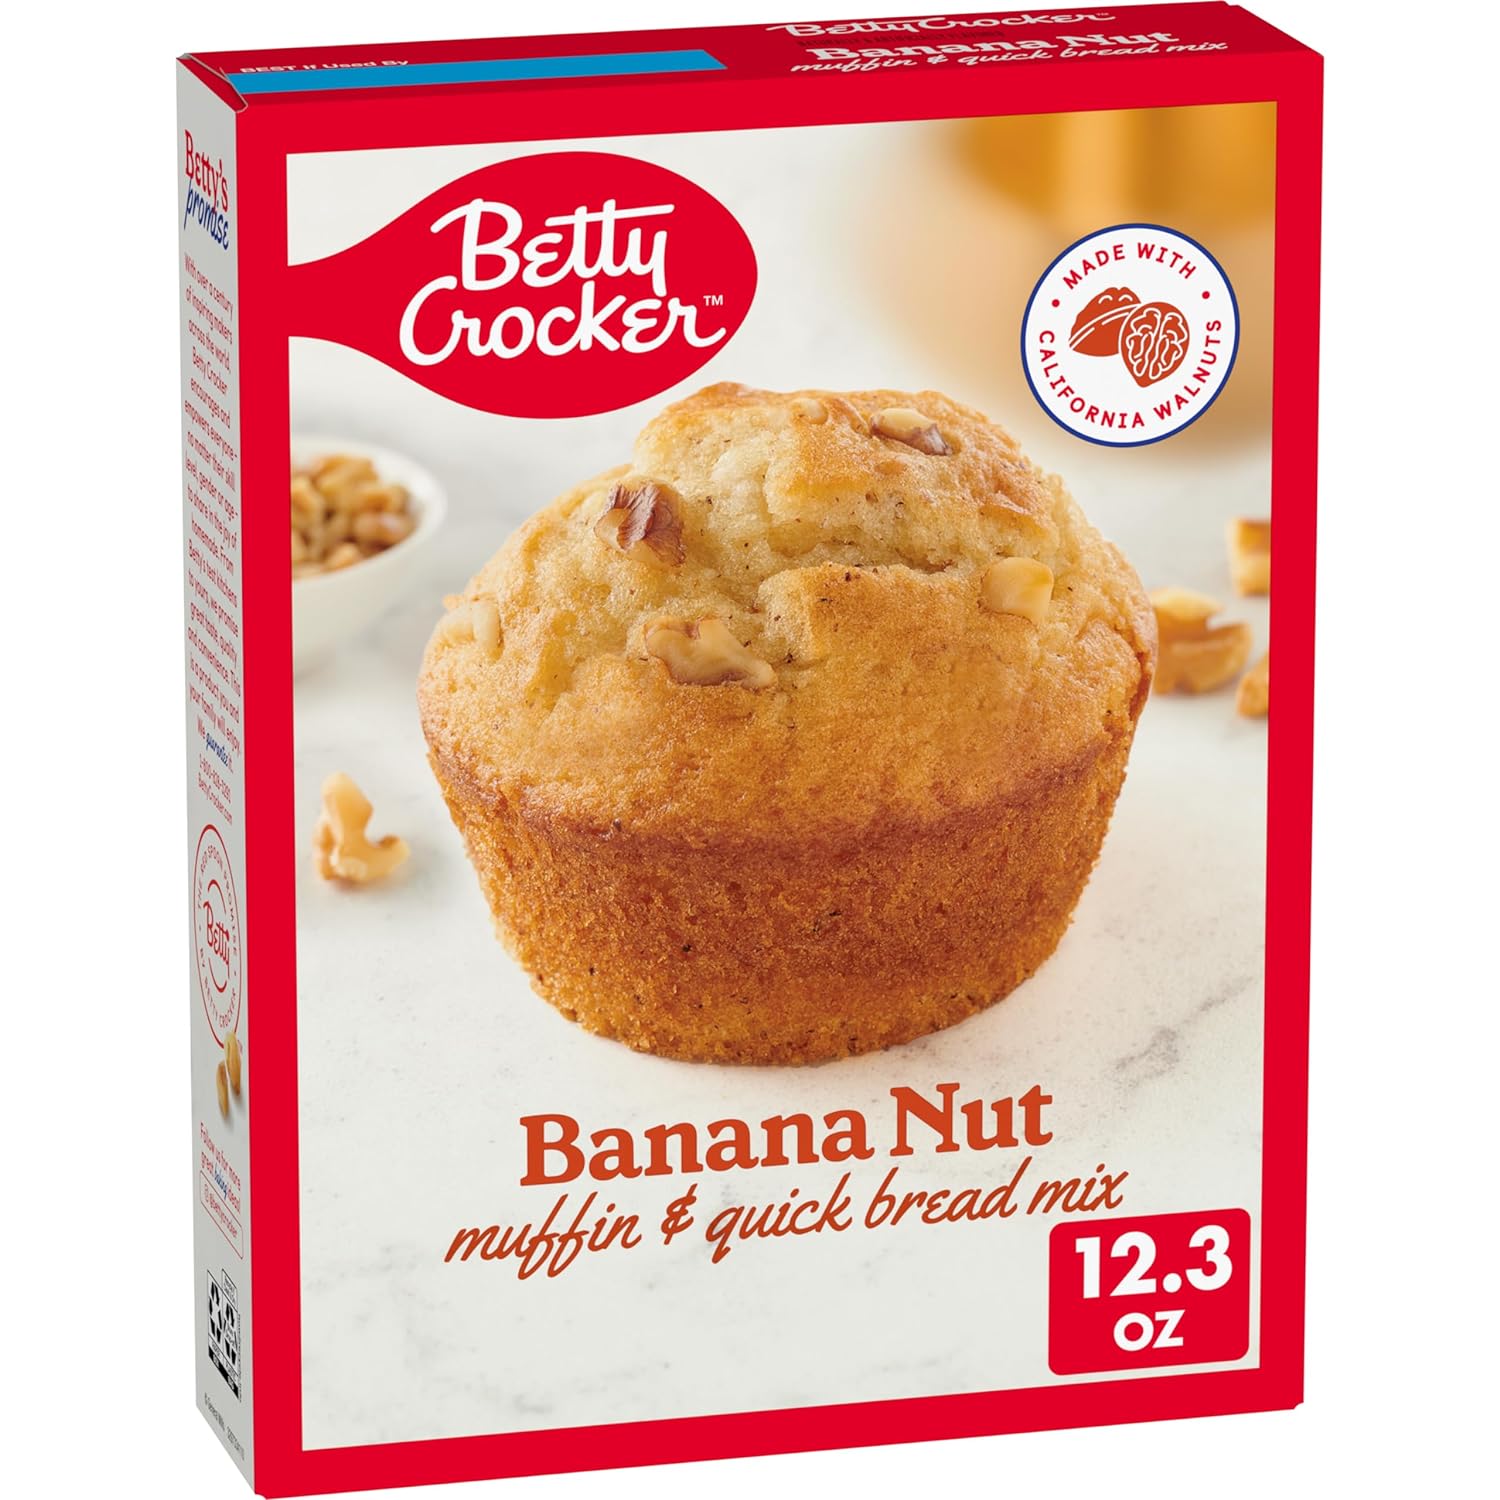 Betty Crocker Banana Nut Muffin and Quick Bread Mix, Made With California Walnuts, 12.3 oz. (Pack of 12)